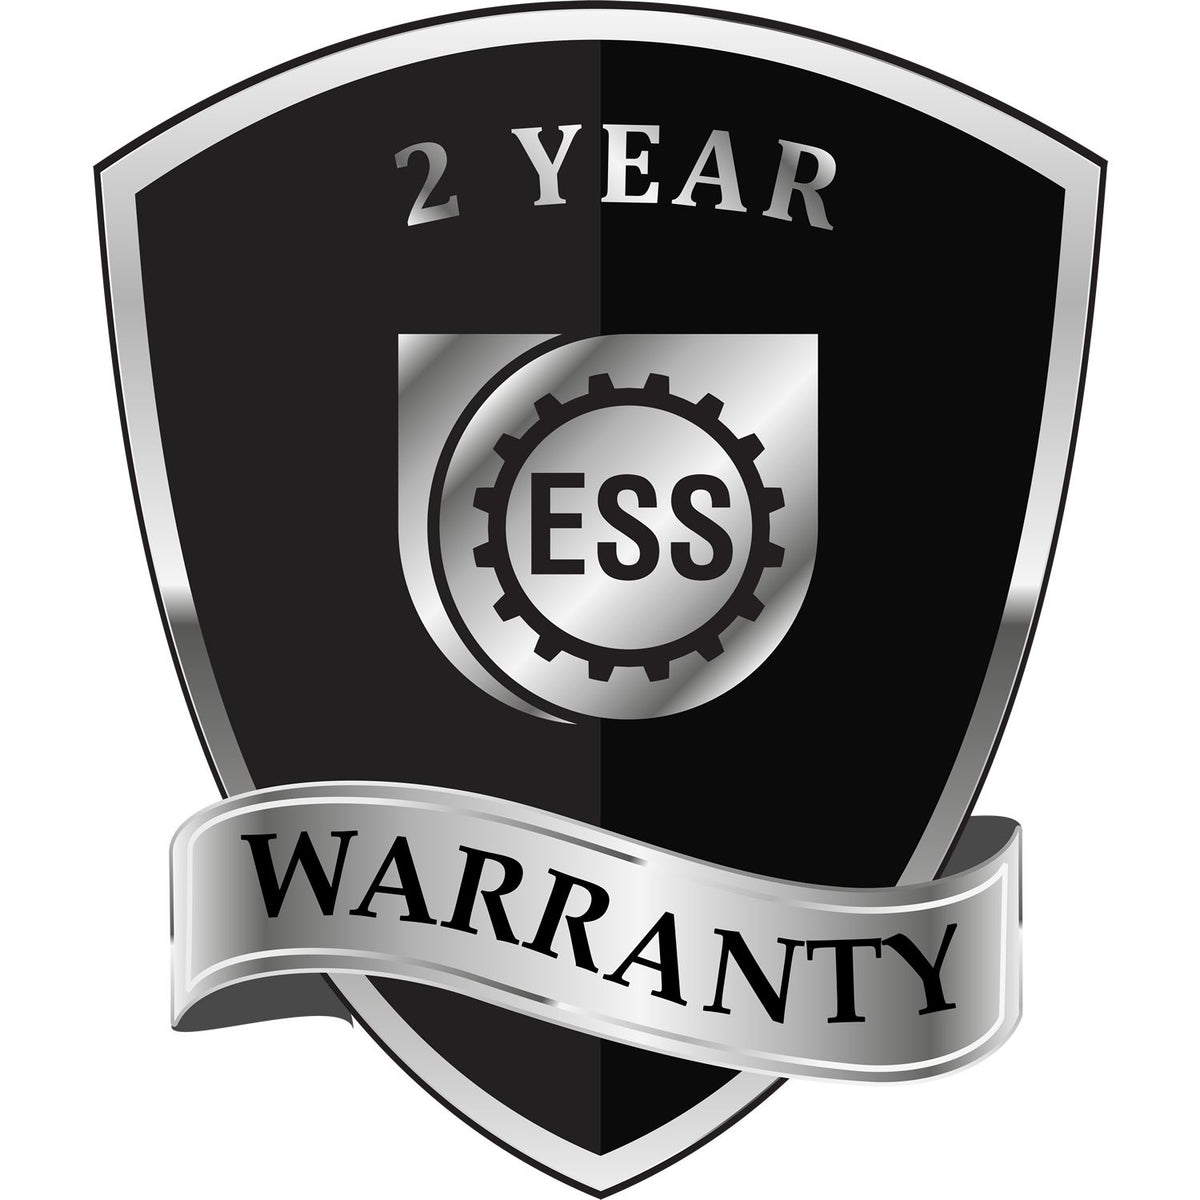 A black and silver badge or emblem showing warranty information for the Michigan Geologist Desk Seal